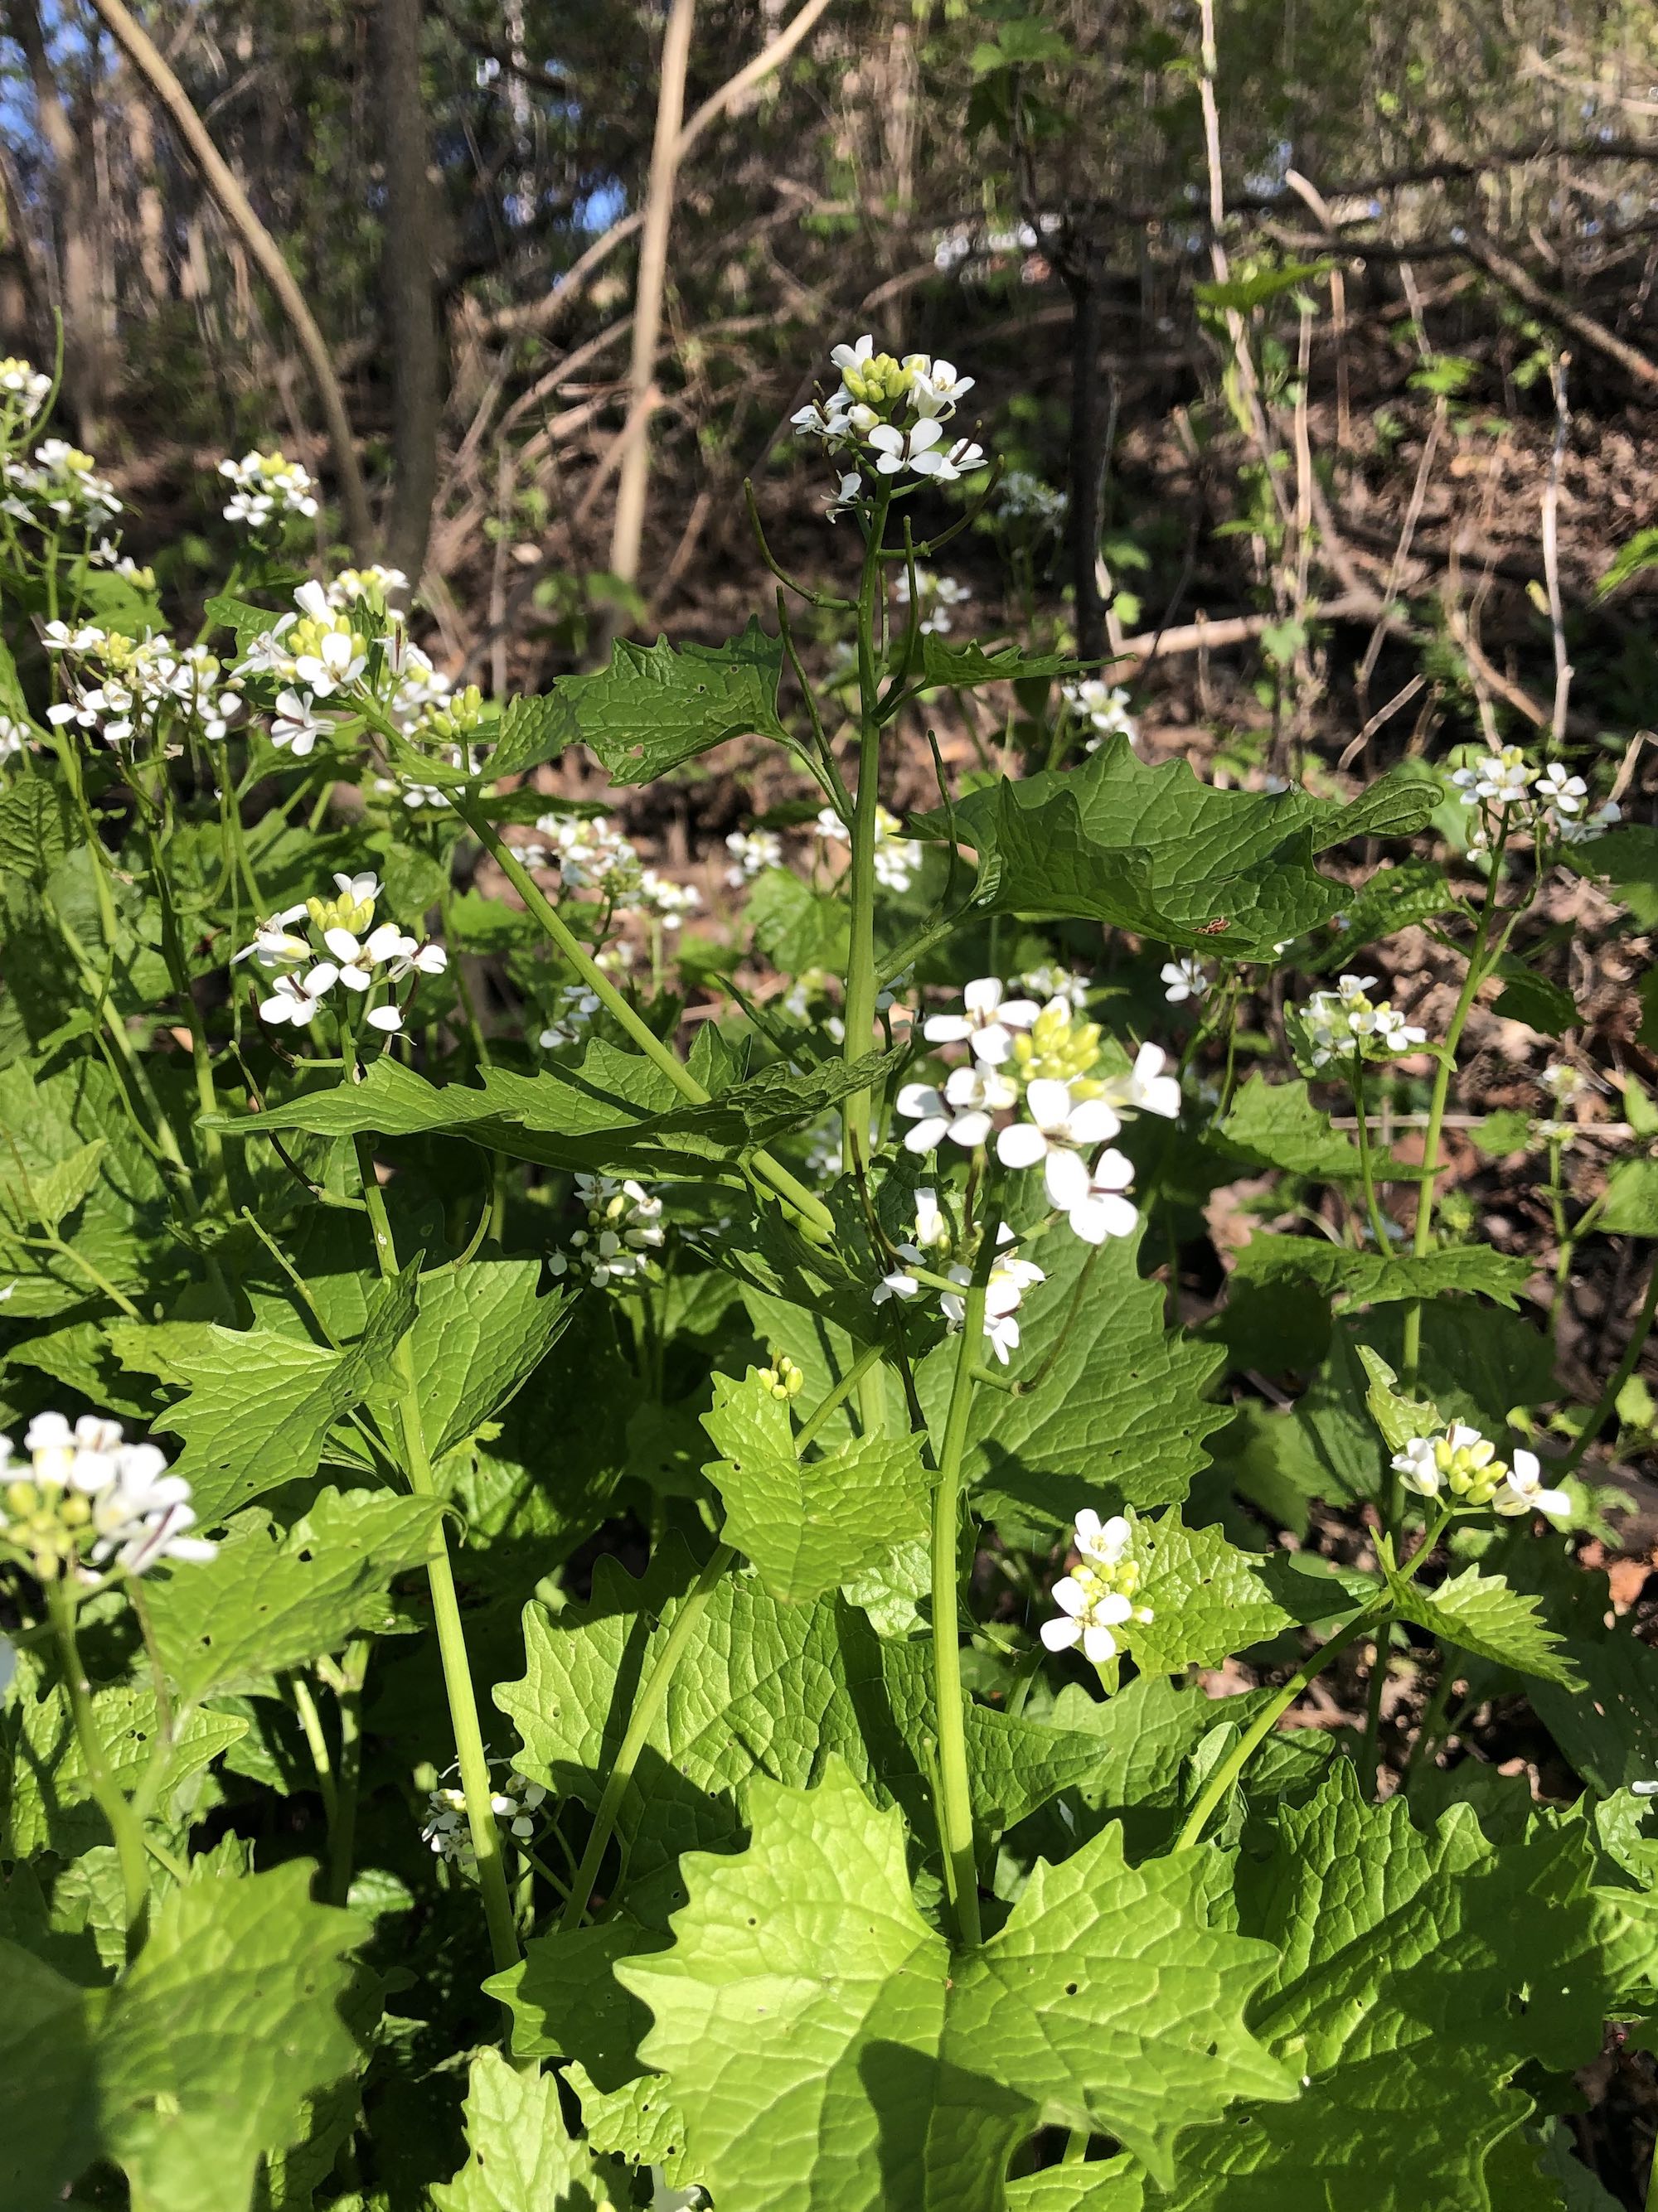 Garlic Mustard by Duck Pond in Madison, Wisconsin on May 13, 2020.